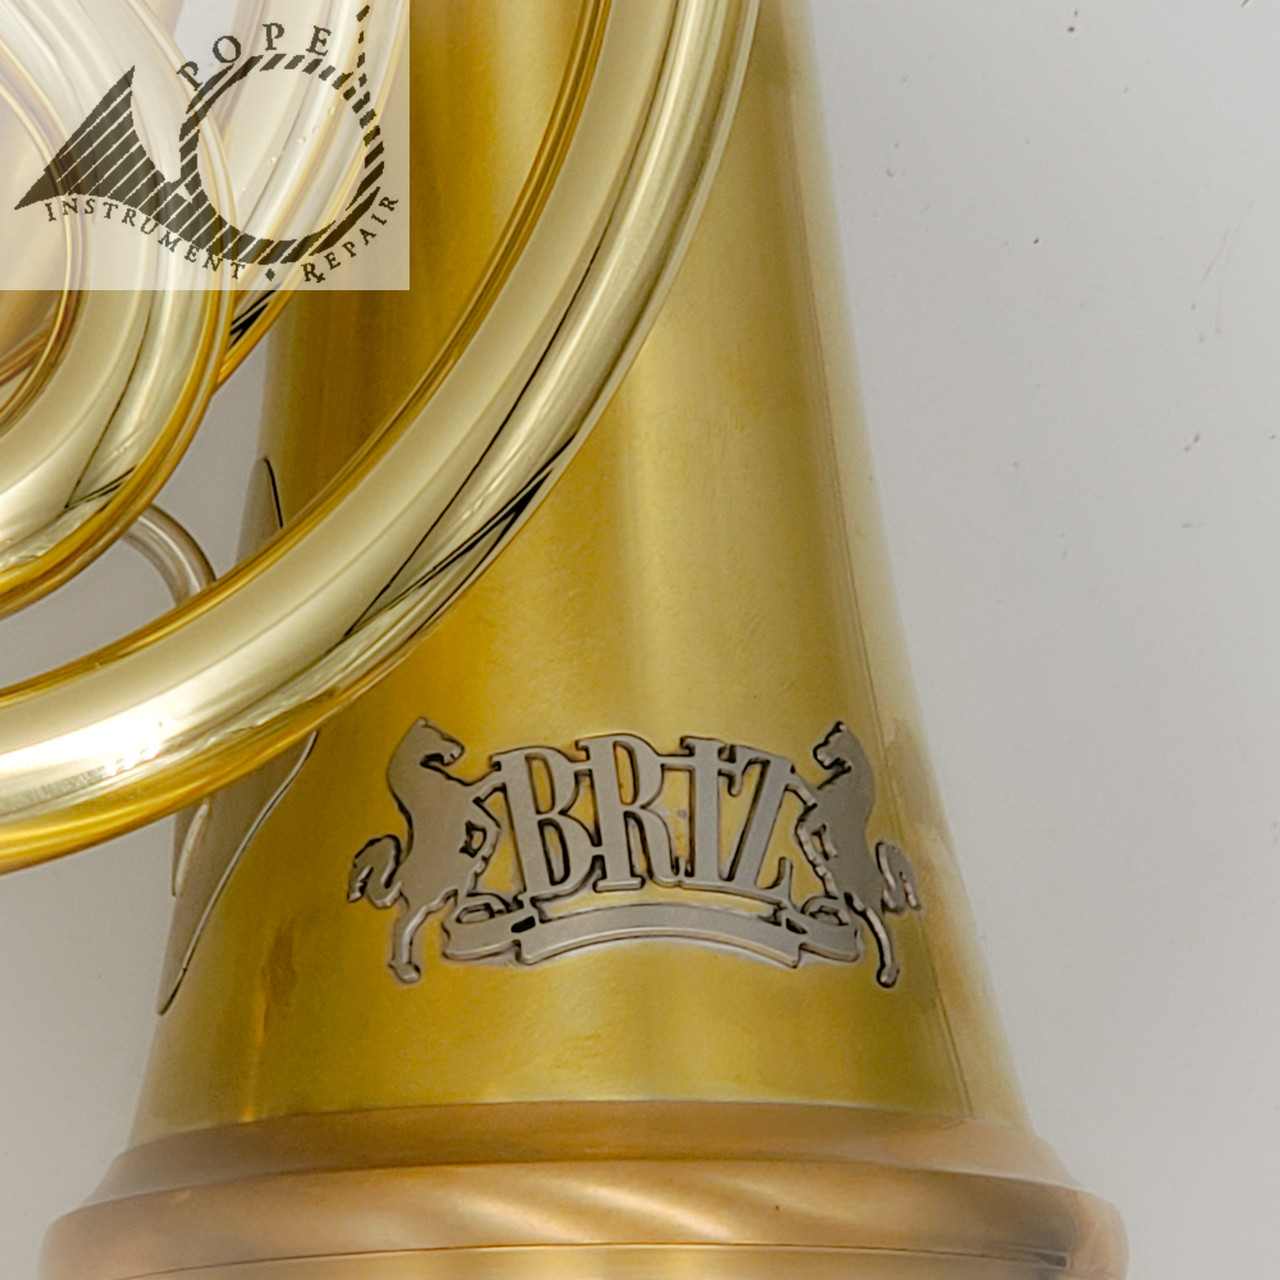 Conn 11D gold brass flare with full ring (lawson/Alexander) MH - Pope Horns  Inc.